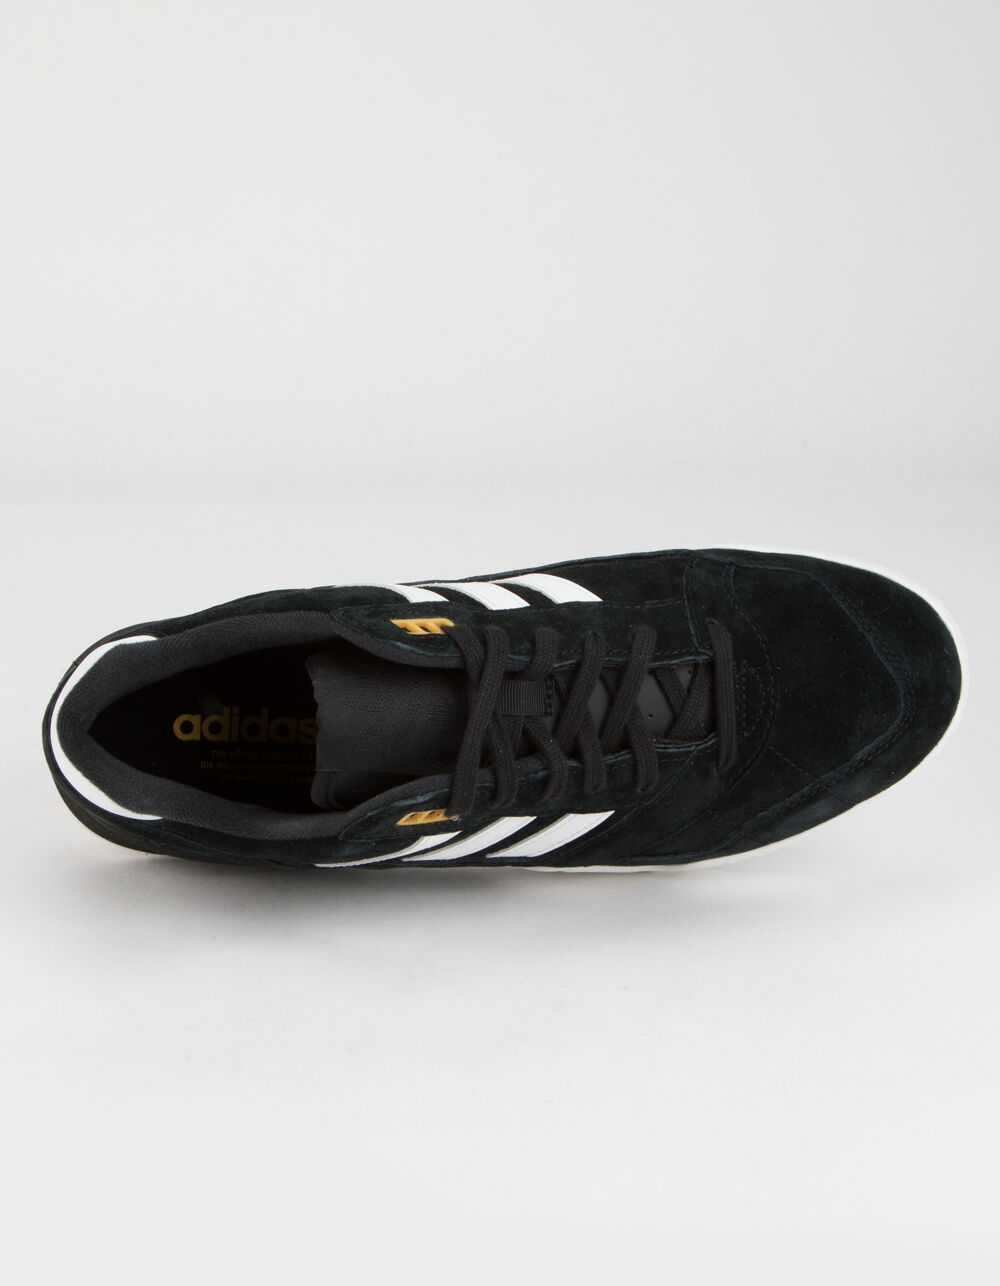 ADIDAS A.R. Trainer Mens Shoes - BLACK/WHITE | Tillys